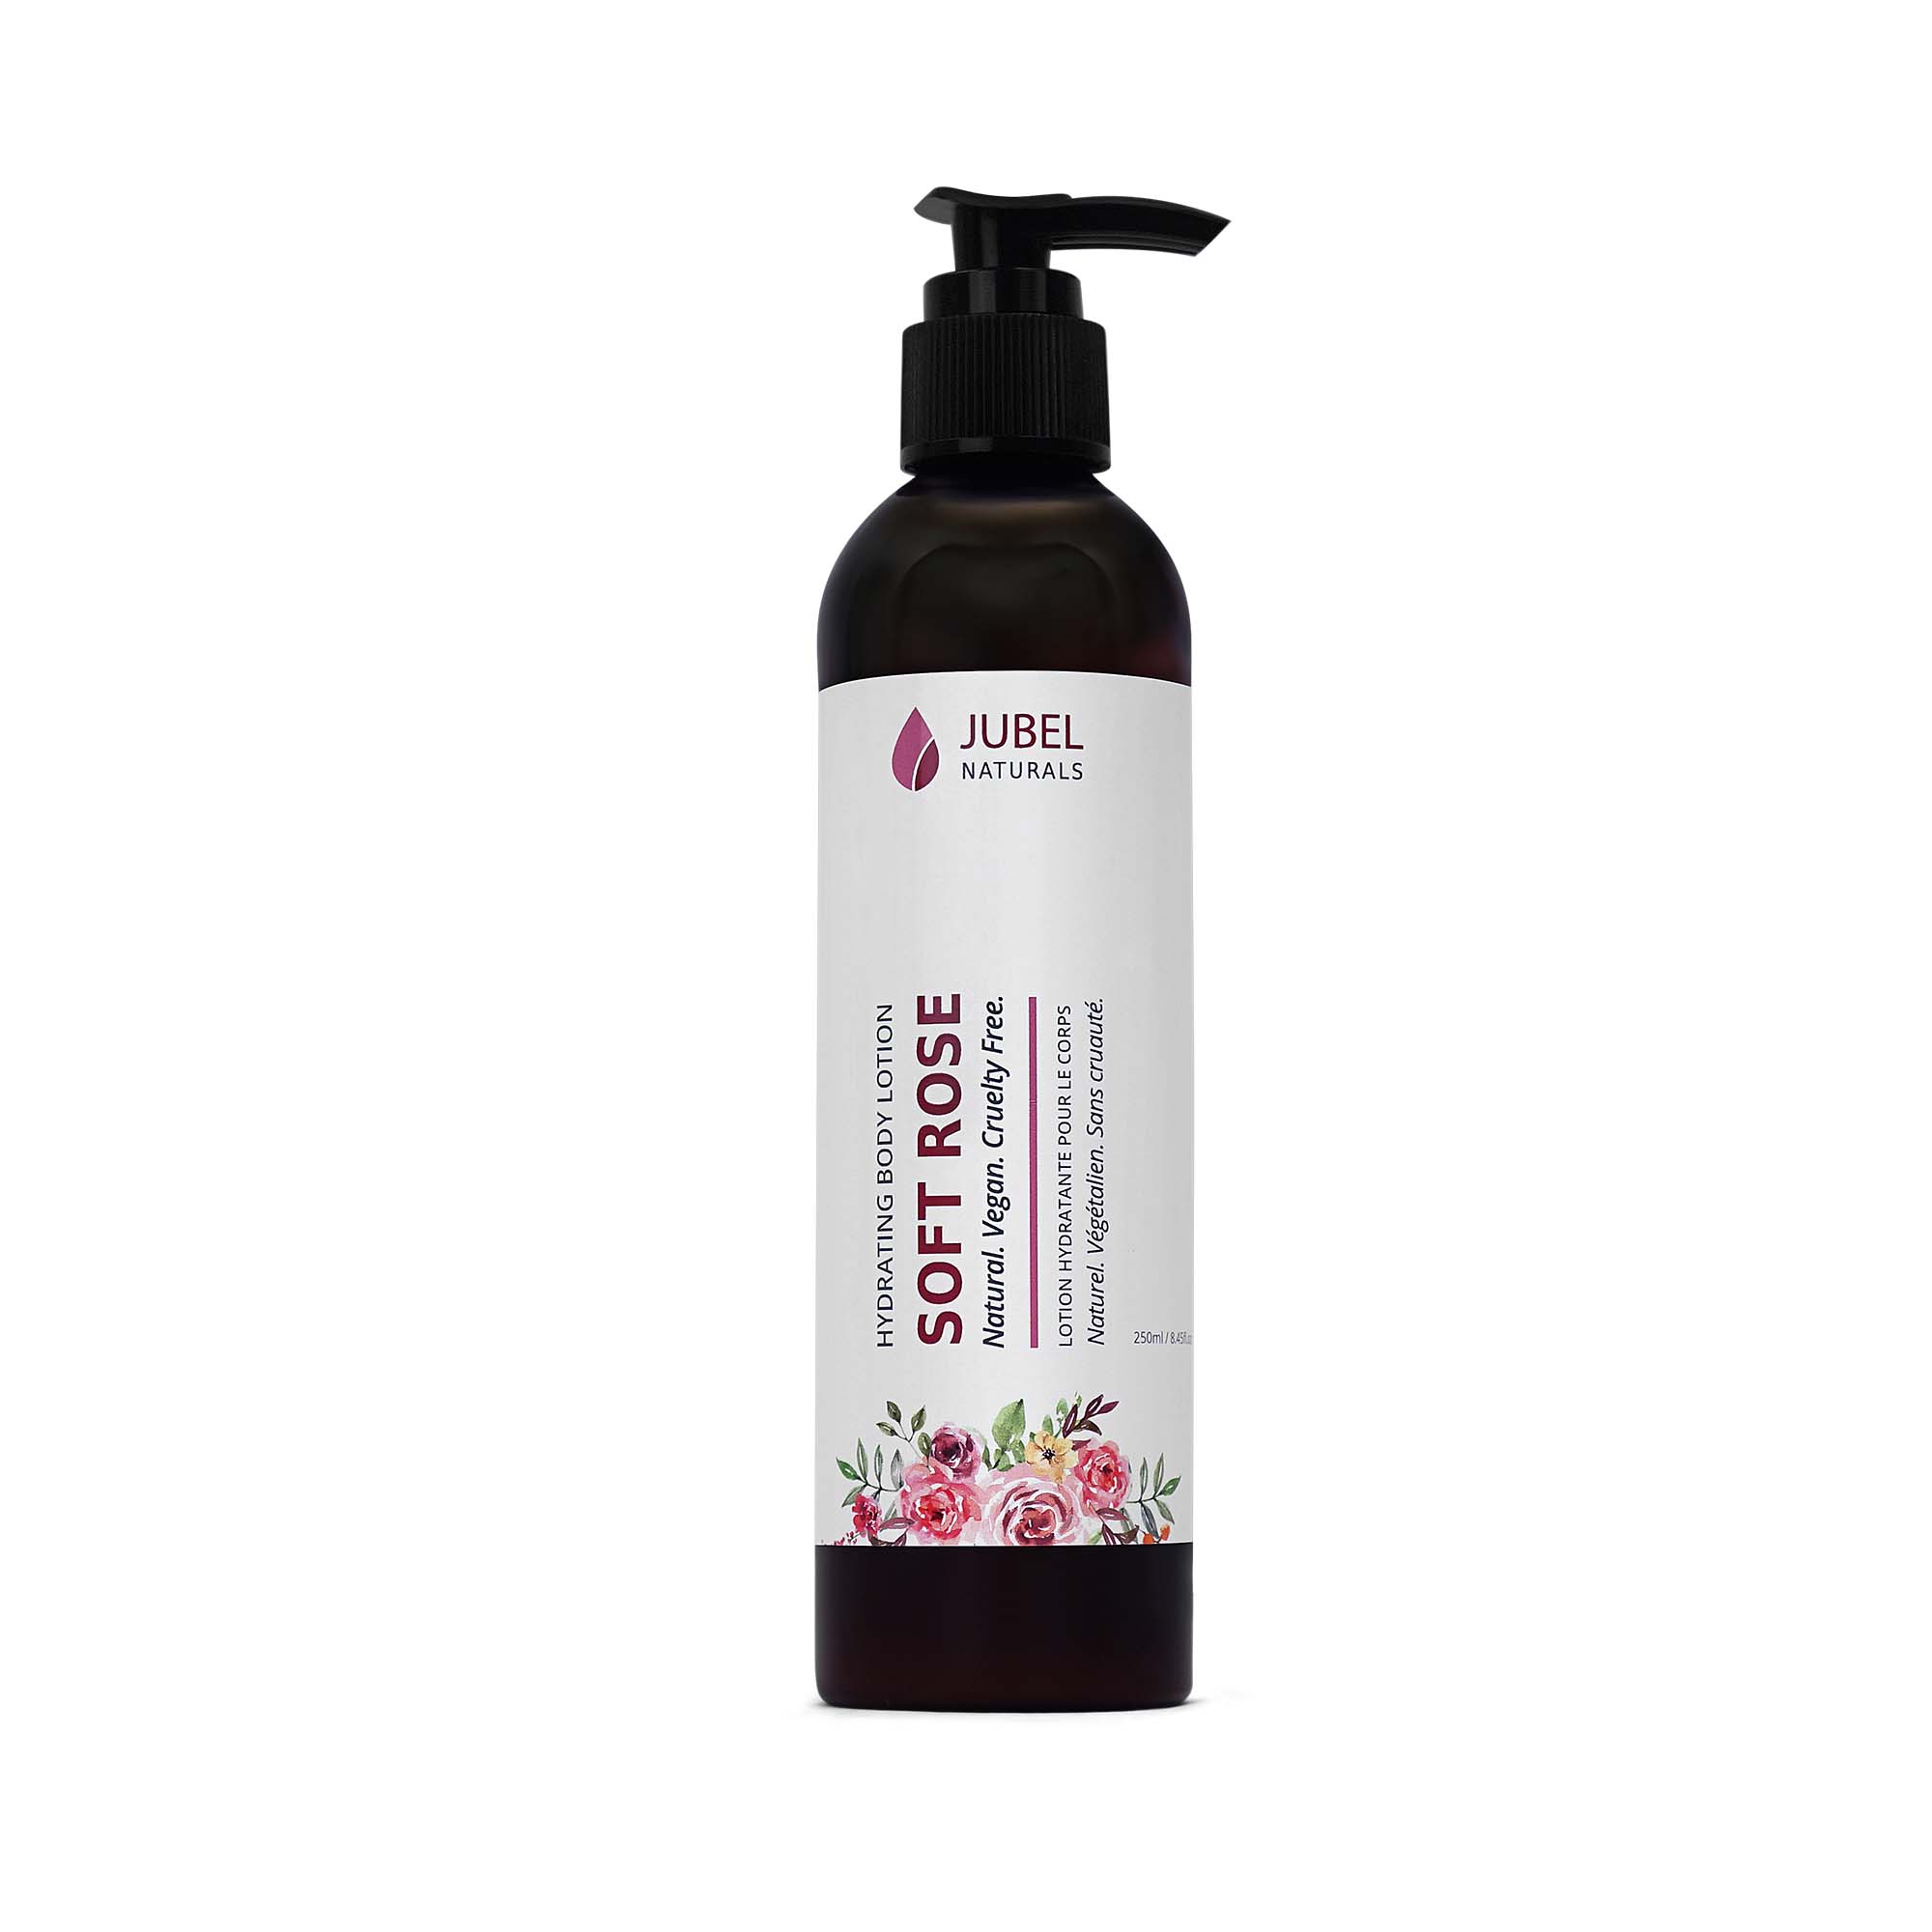 Soft Rose Hand & Body Lotion